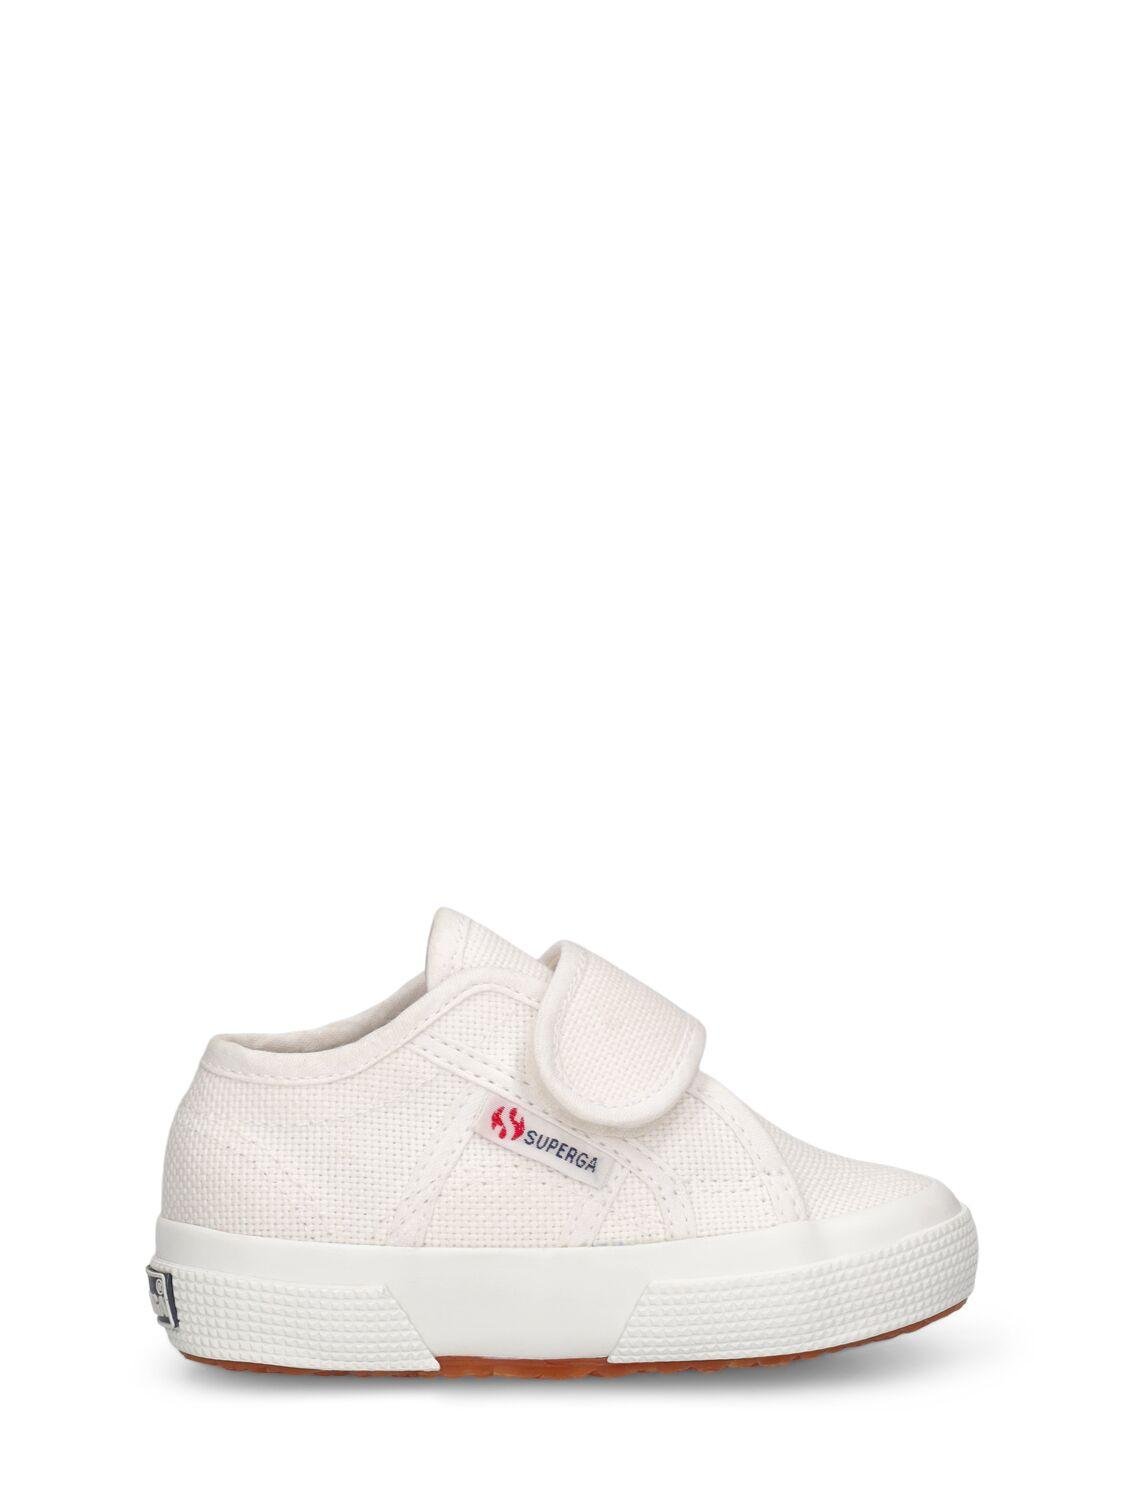 2750-bstrap Cotton Canvas Sneakers by SUPERGA